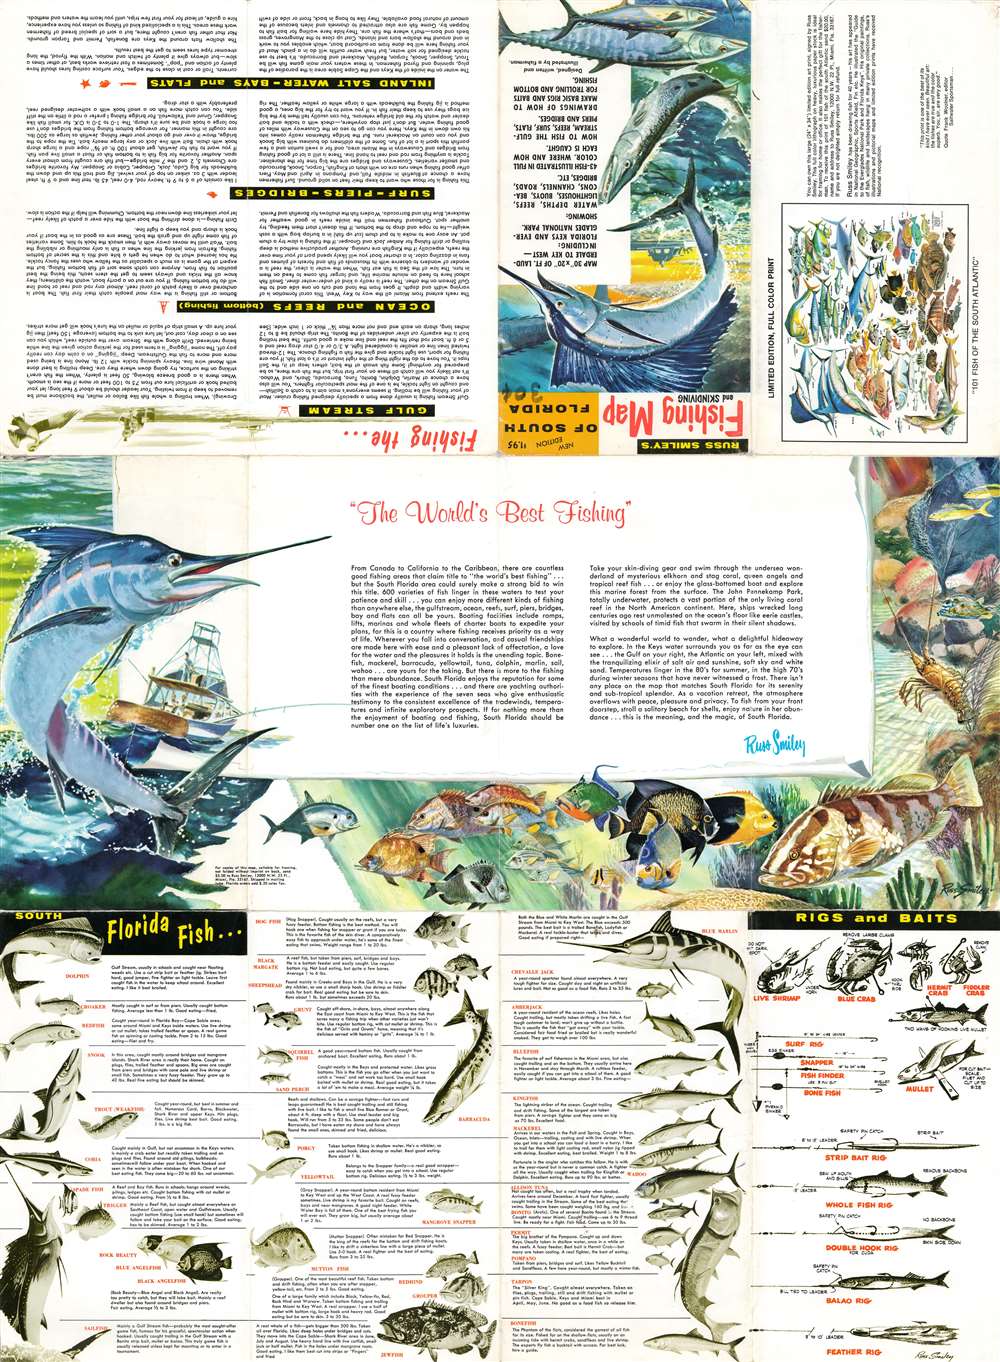 Russ Smiley's Fishing Map of South Florida. - Alternate View 1